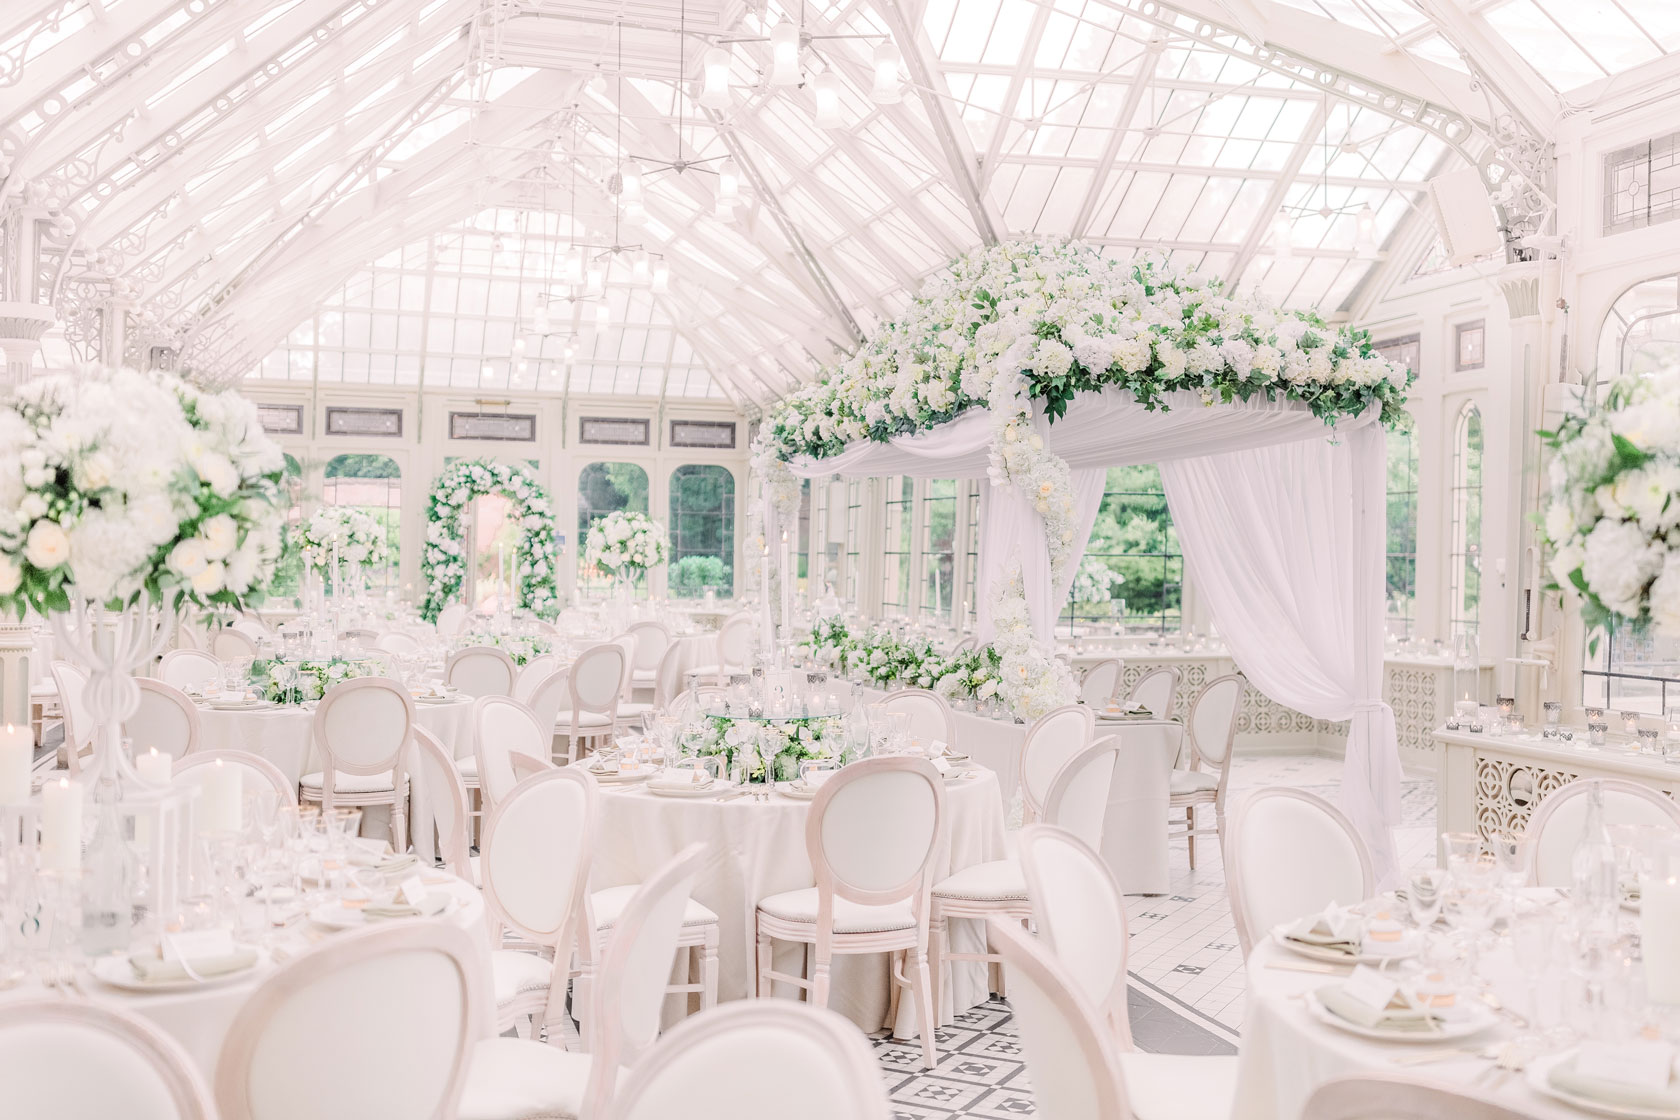 A stunning white flowerhouse inside a glass house orangery at Kilworth House